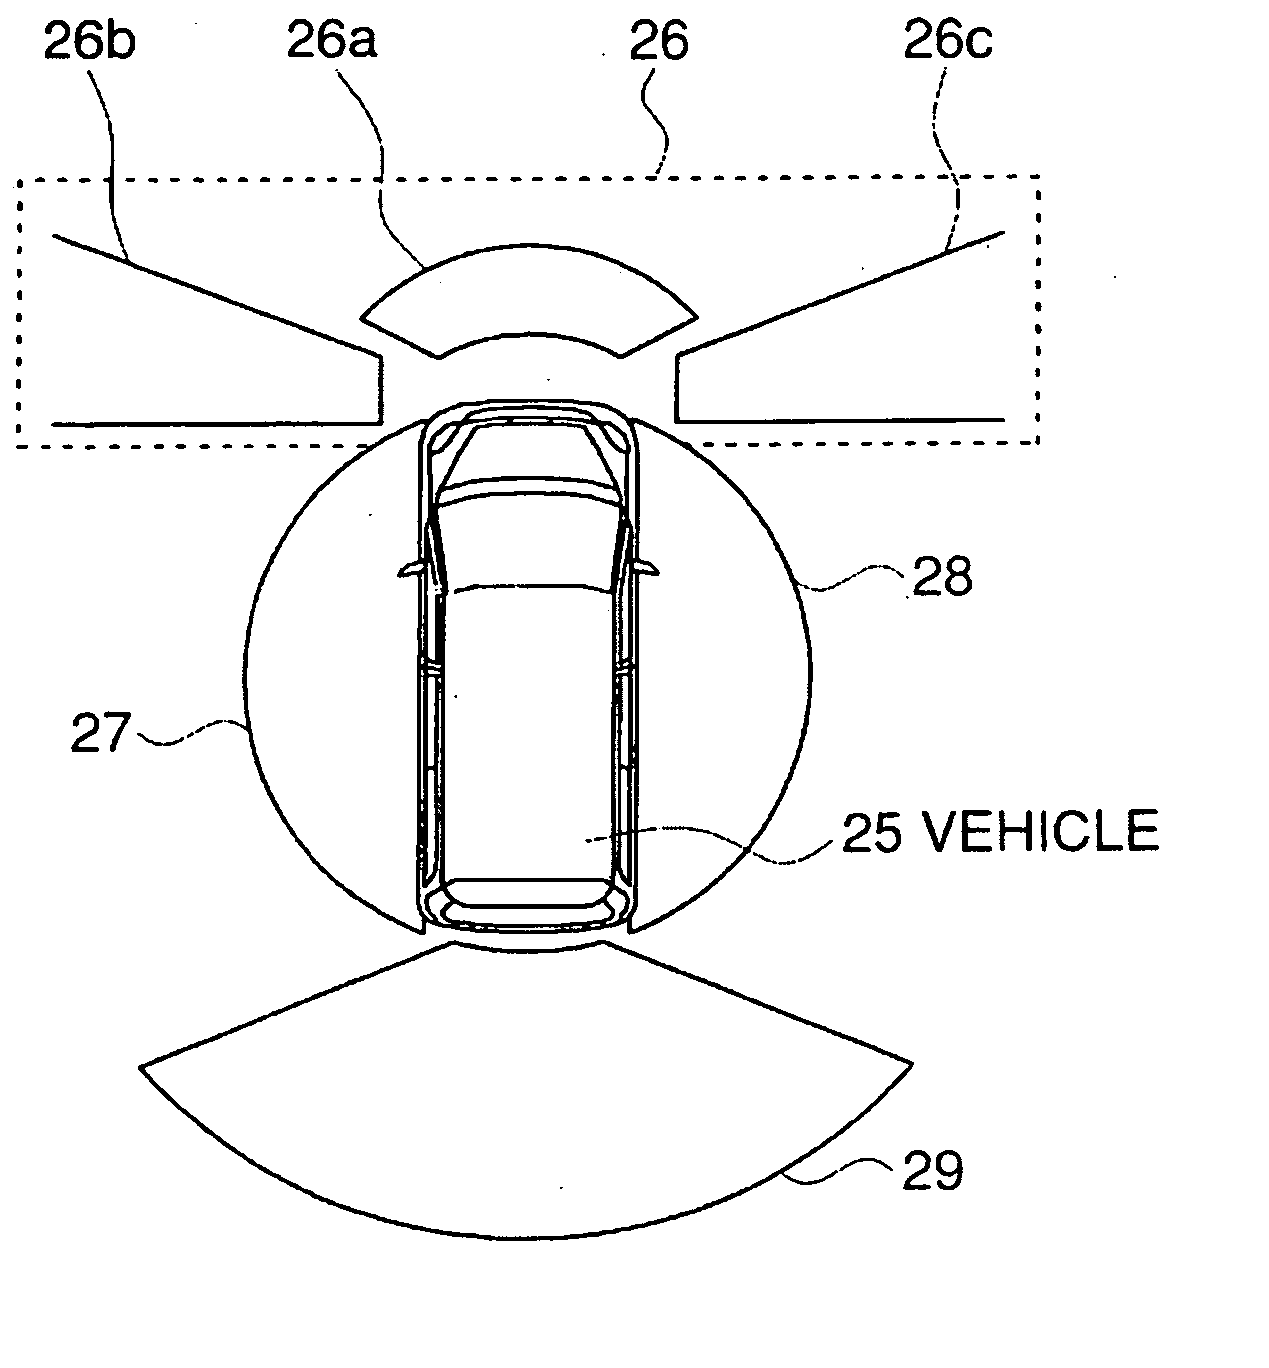 Visual recognition apparatus, methods, and programs for vehicles